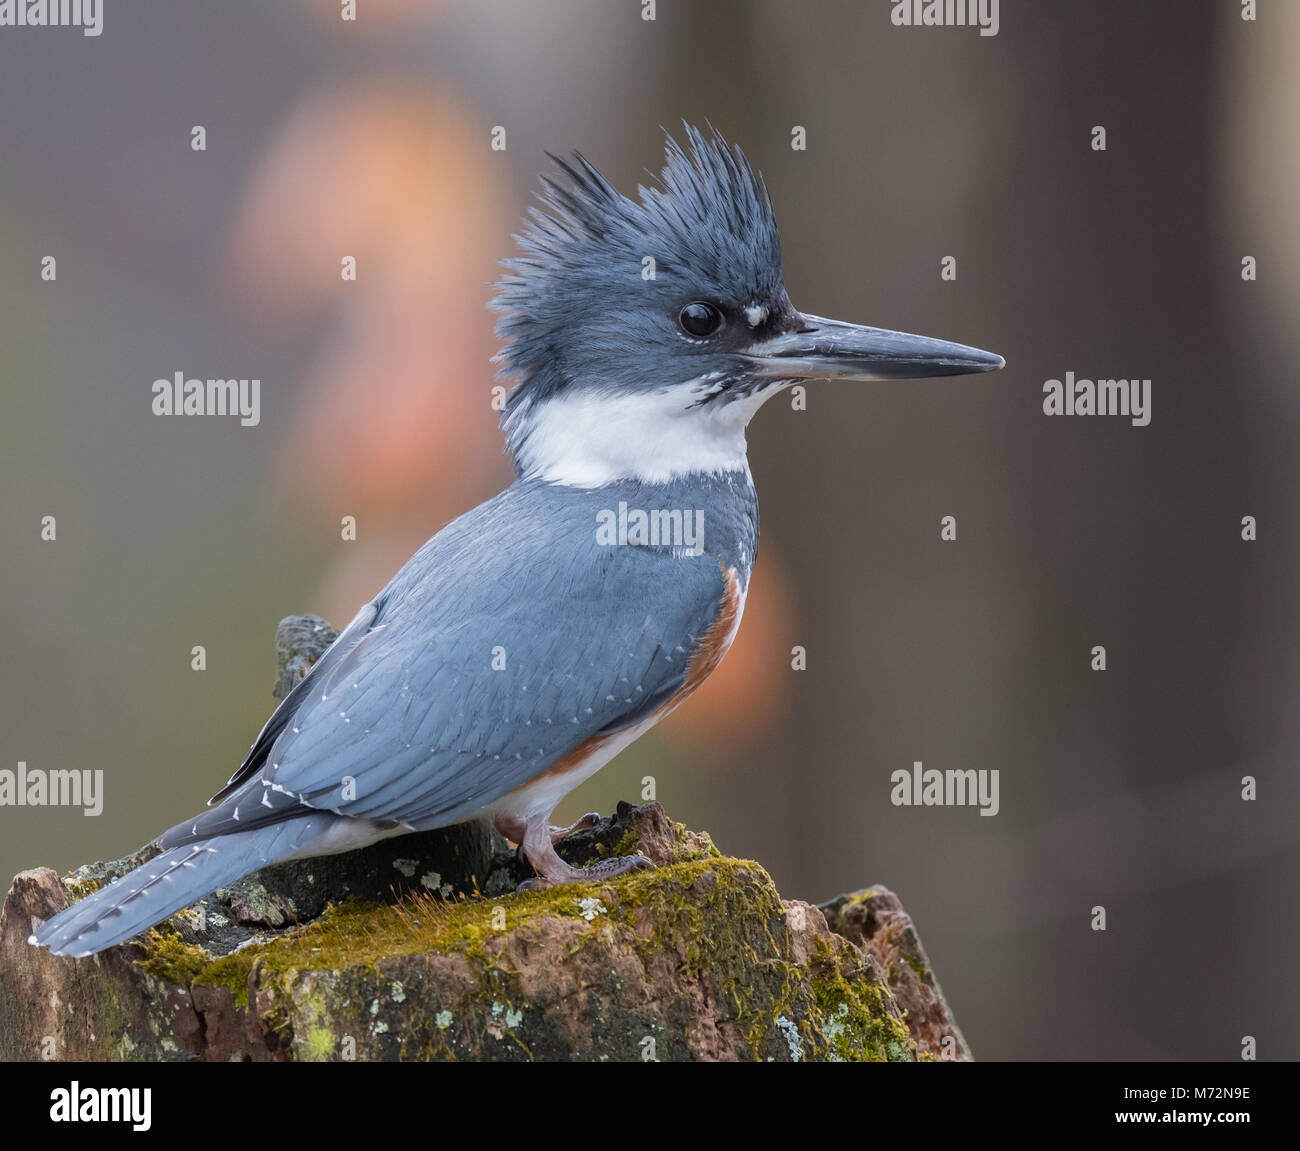 Belted Kingfisher Portrait Stock Photo